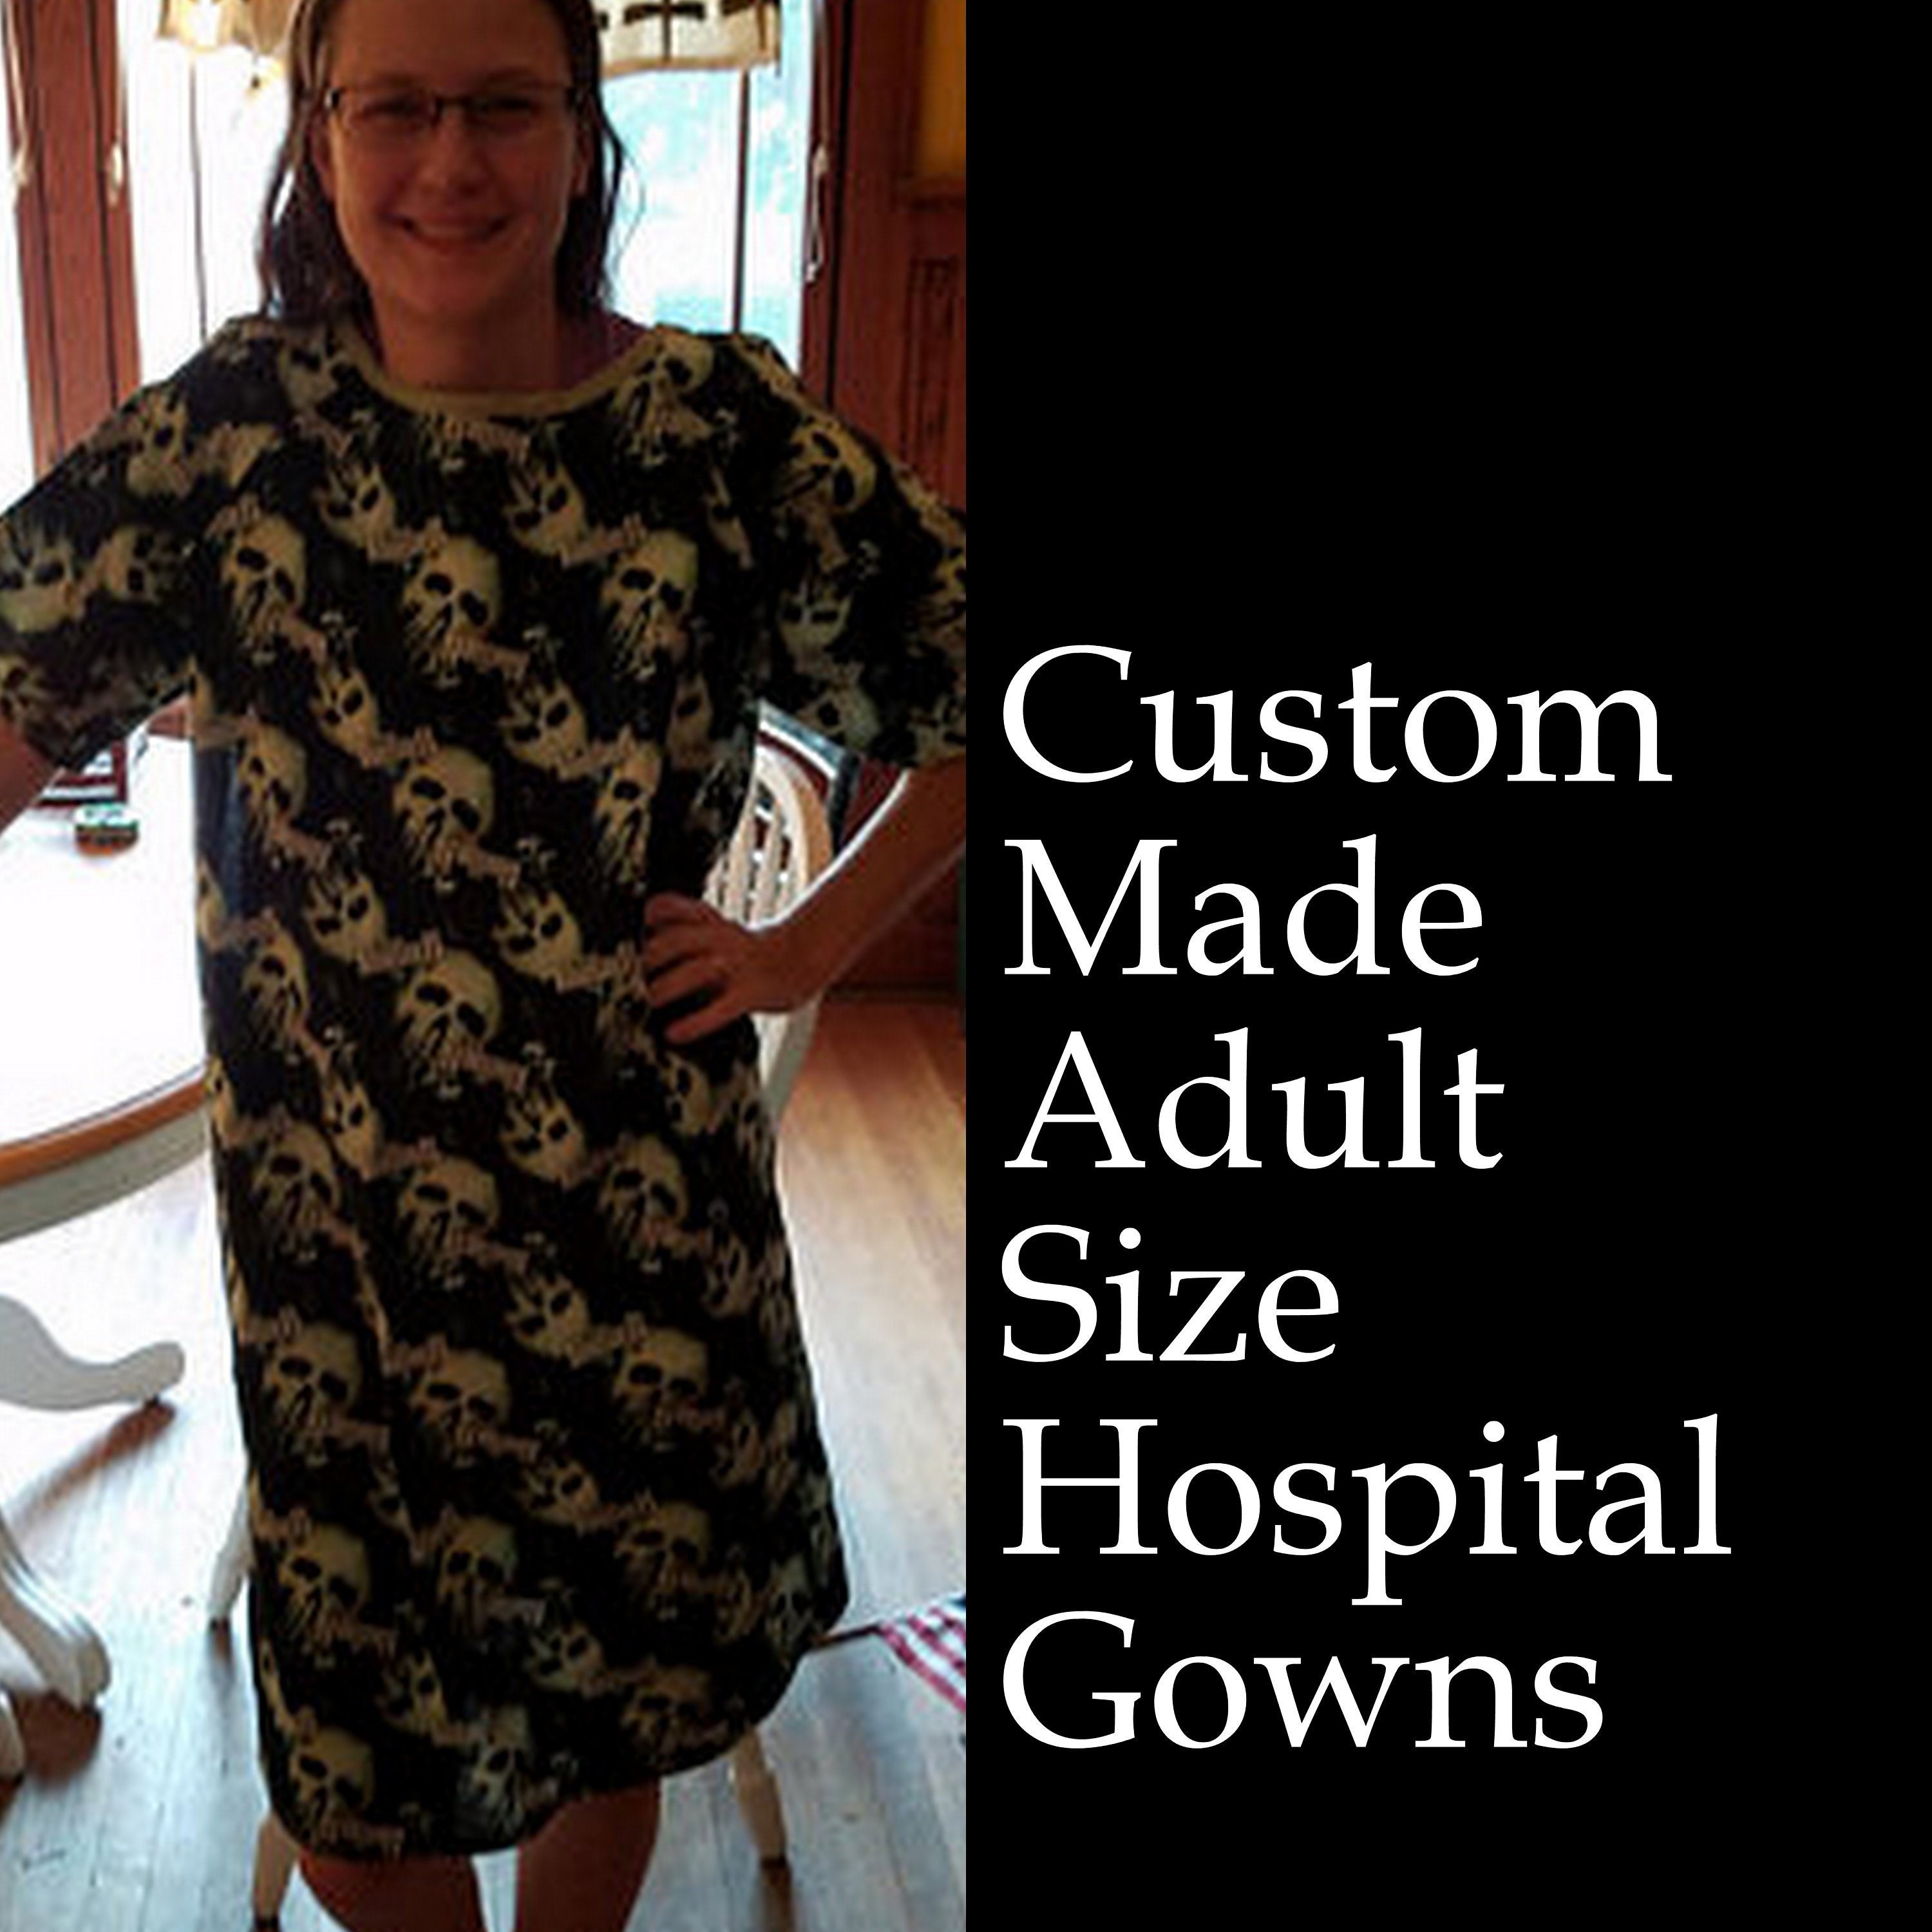 Nobles Health Care Stars Print Unisex Hospital Gowns - 3X / IV -Pack of 2 |  eBay